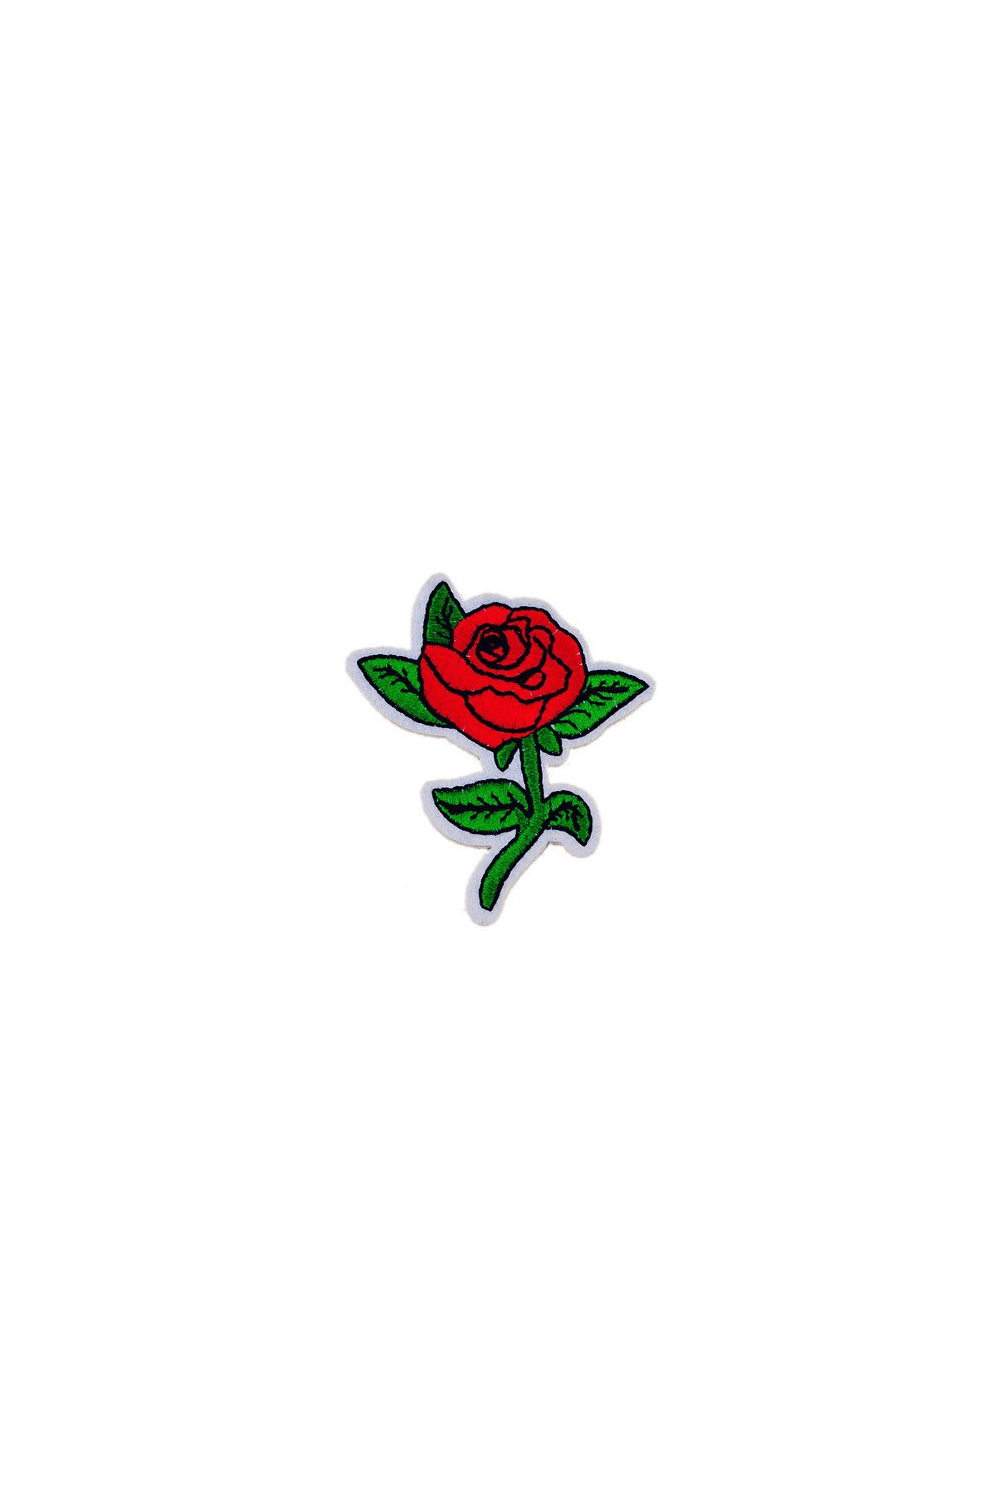 Red Rose Iron On Woven Patch. Red Roses, Rose Wallpaper